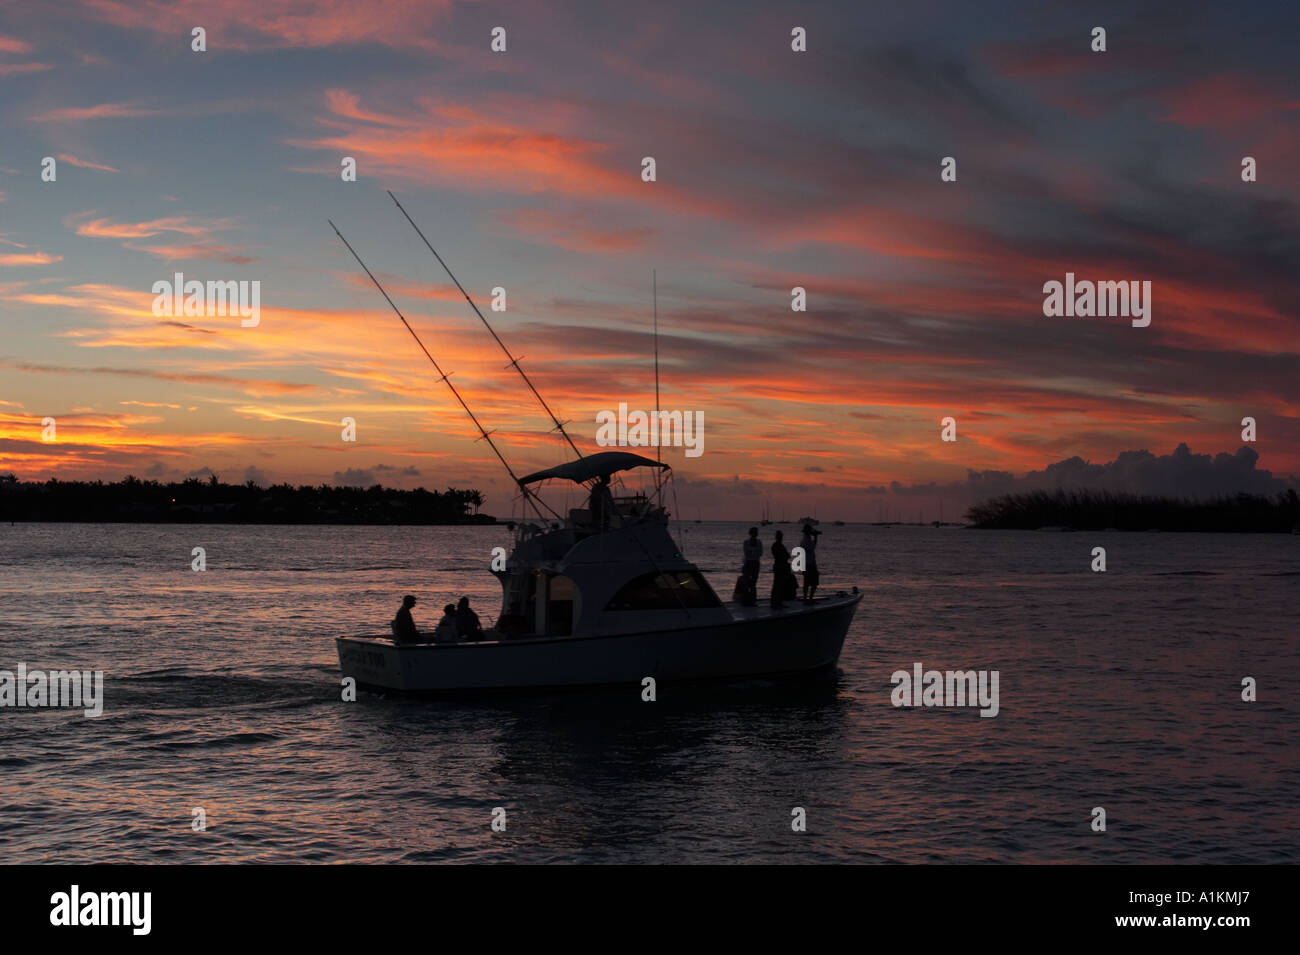 https://c8.alamy.com/comp/A1KMJ7/a-fishing-boat-in-silhouette-against-a-dramatic-sunset-on-the-ocean-A1KMJ7.jpg